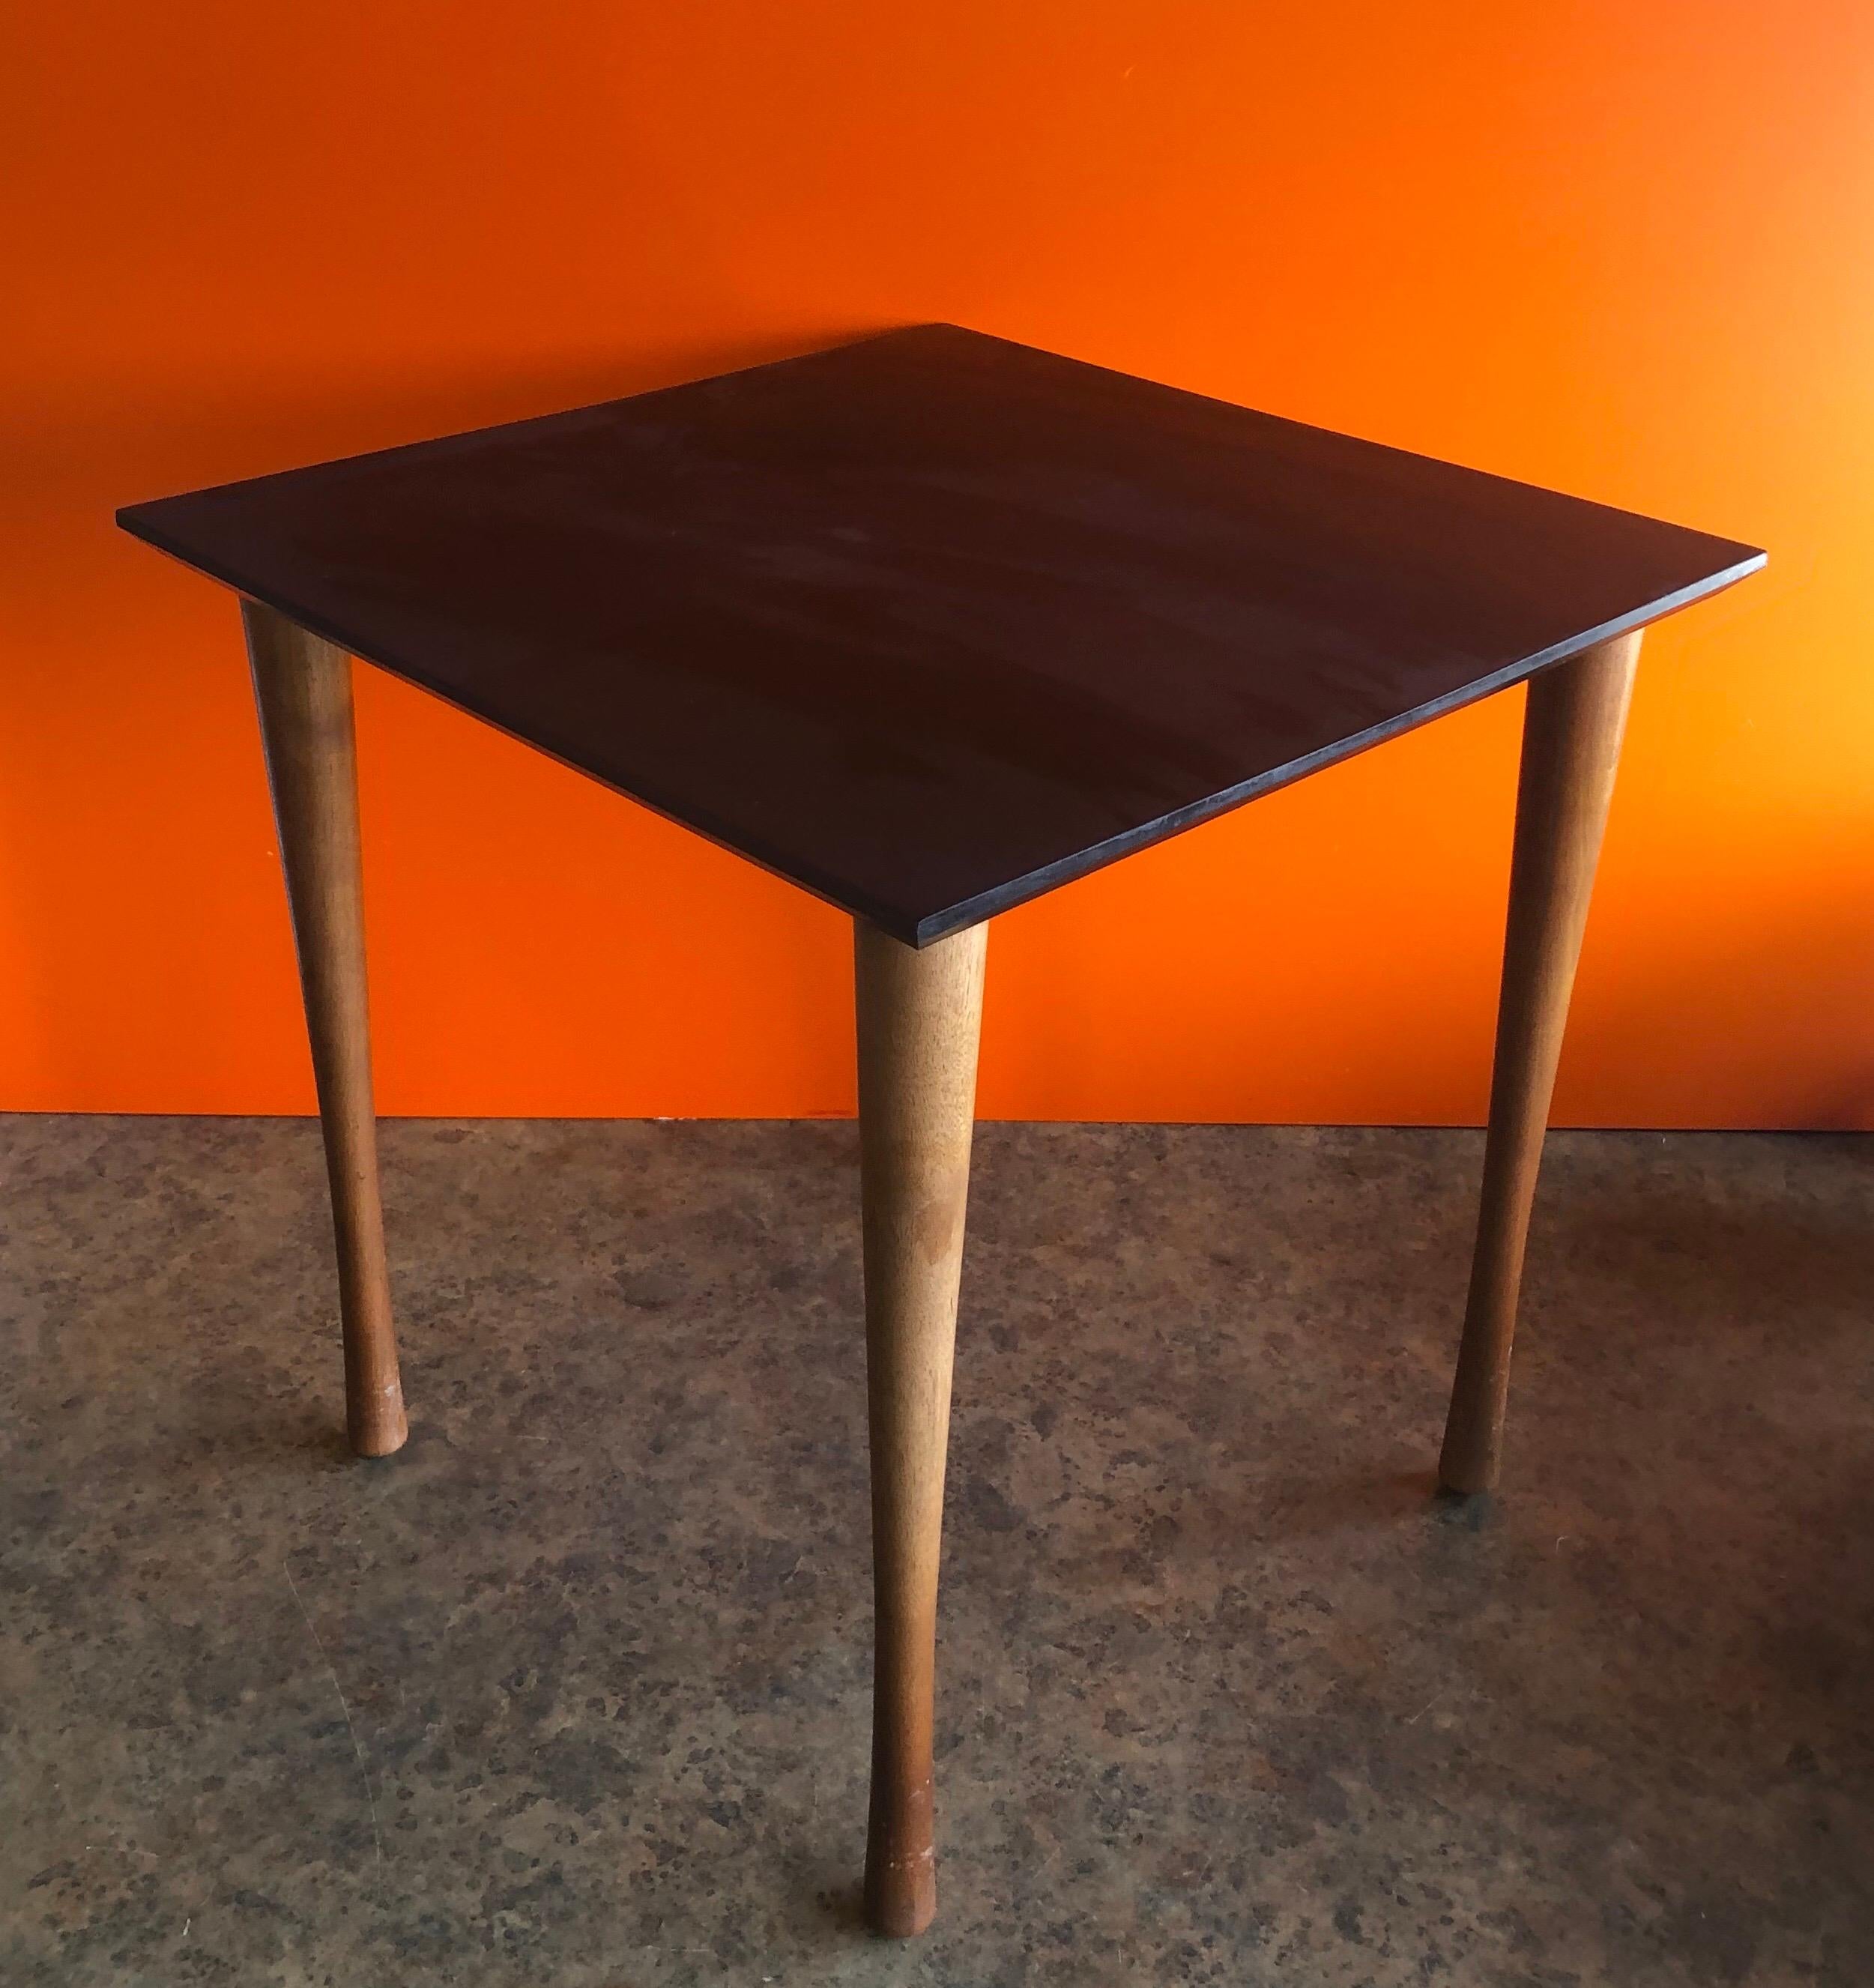 Midcentury quartered black slate side table with solid walnut legs by Harpswell House, circa 1970s. The piece is in very good condition and measures: 17.875 square x 18.125